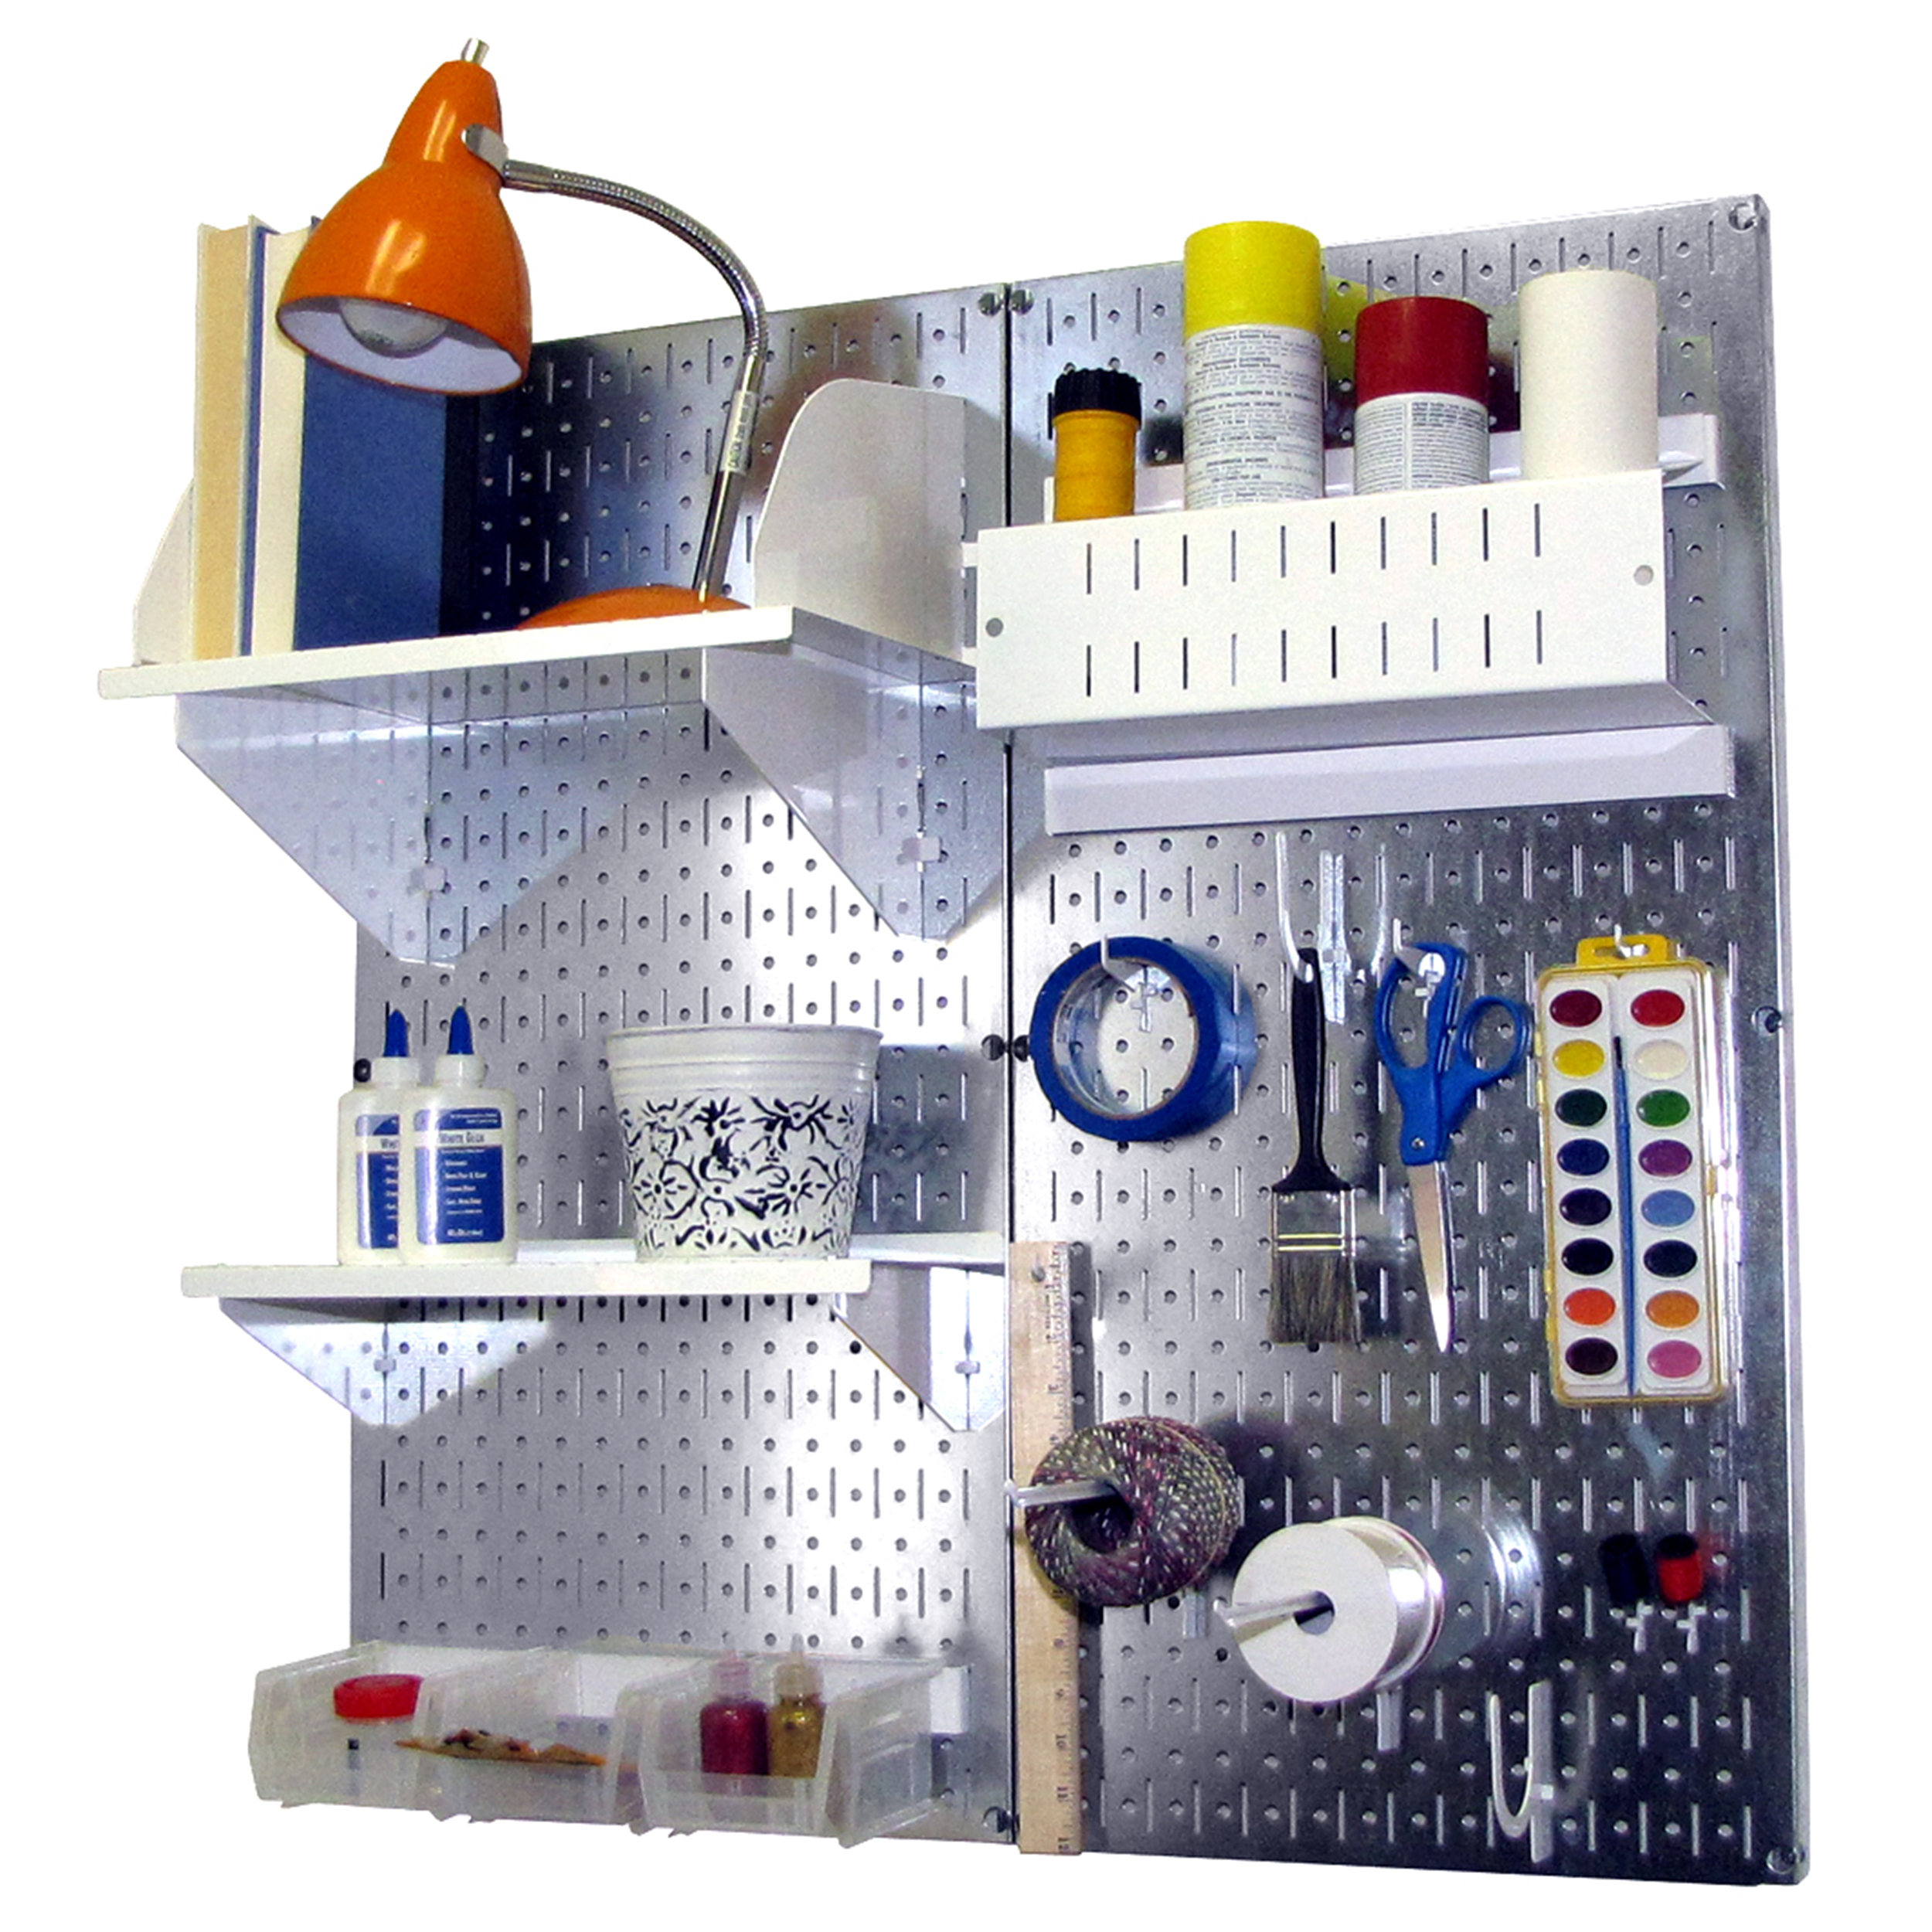 Pegboard Hobby Craft Pegboard Organizer Storage Kit With Metallic Pegboard And White Accessories